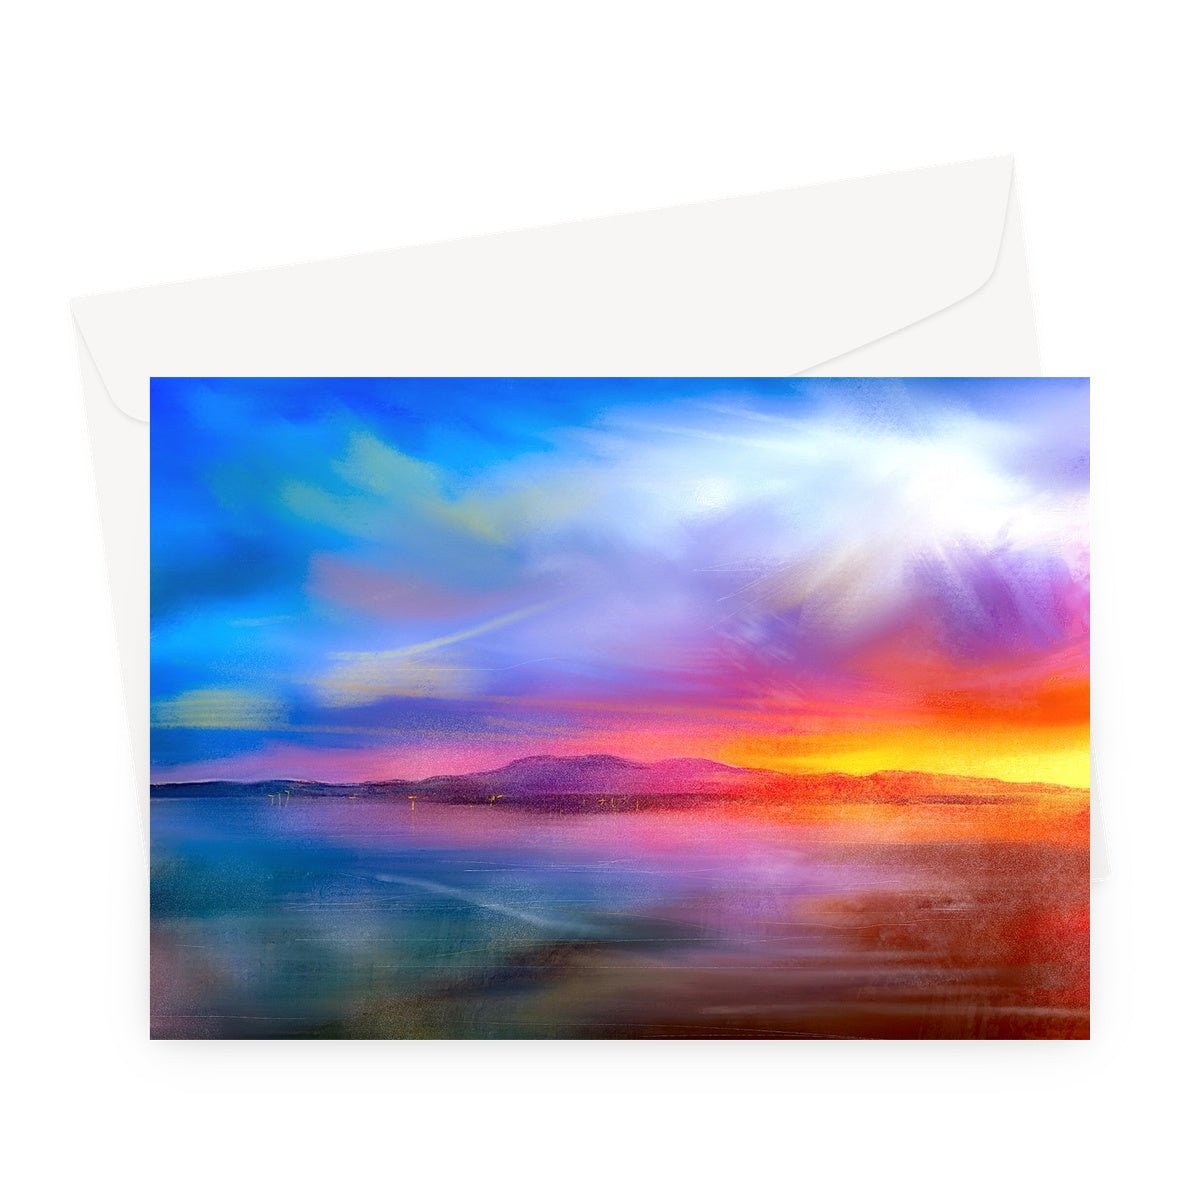 Arran Sunset Art Gift Greeting Card-Greetings Cards-Arran Art Gallery-A5 Landscape-1 Card-Paintings, Prints, Homeware, Art Gifts From Scotland By Scottish Artist Kevin Hunter